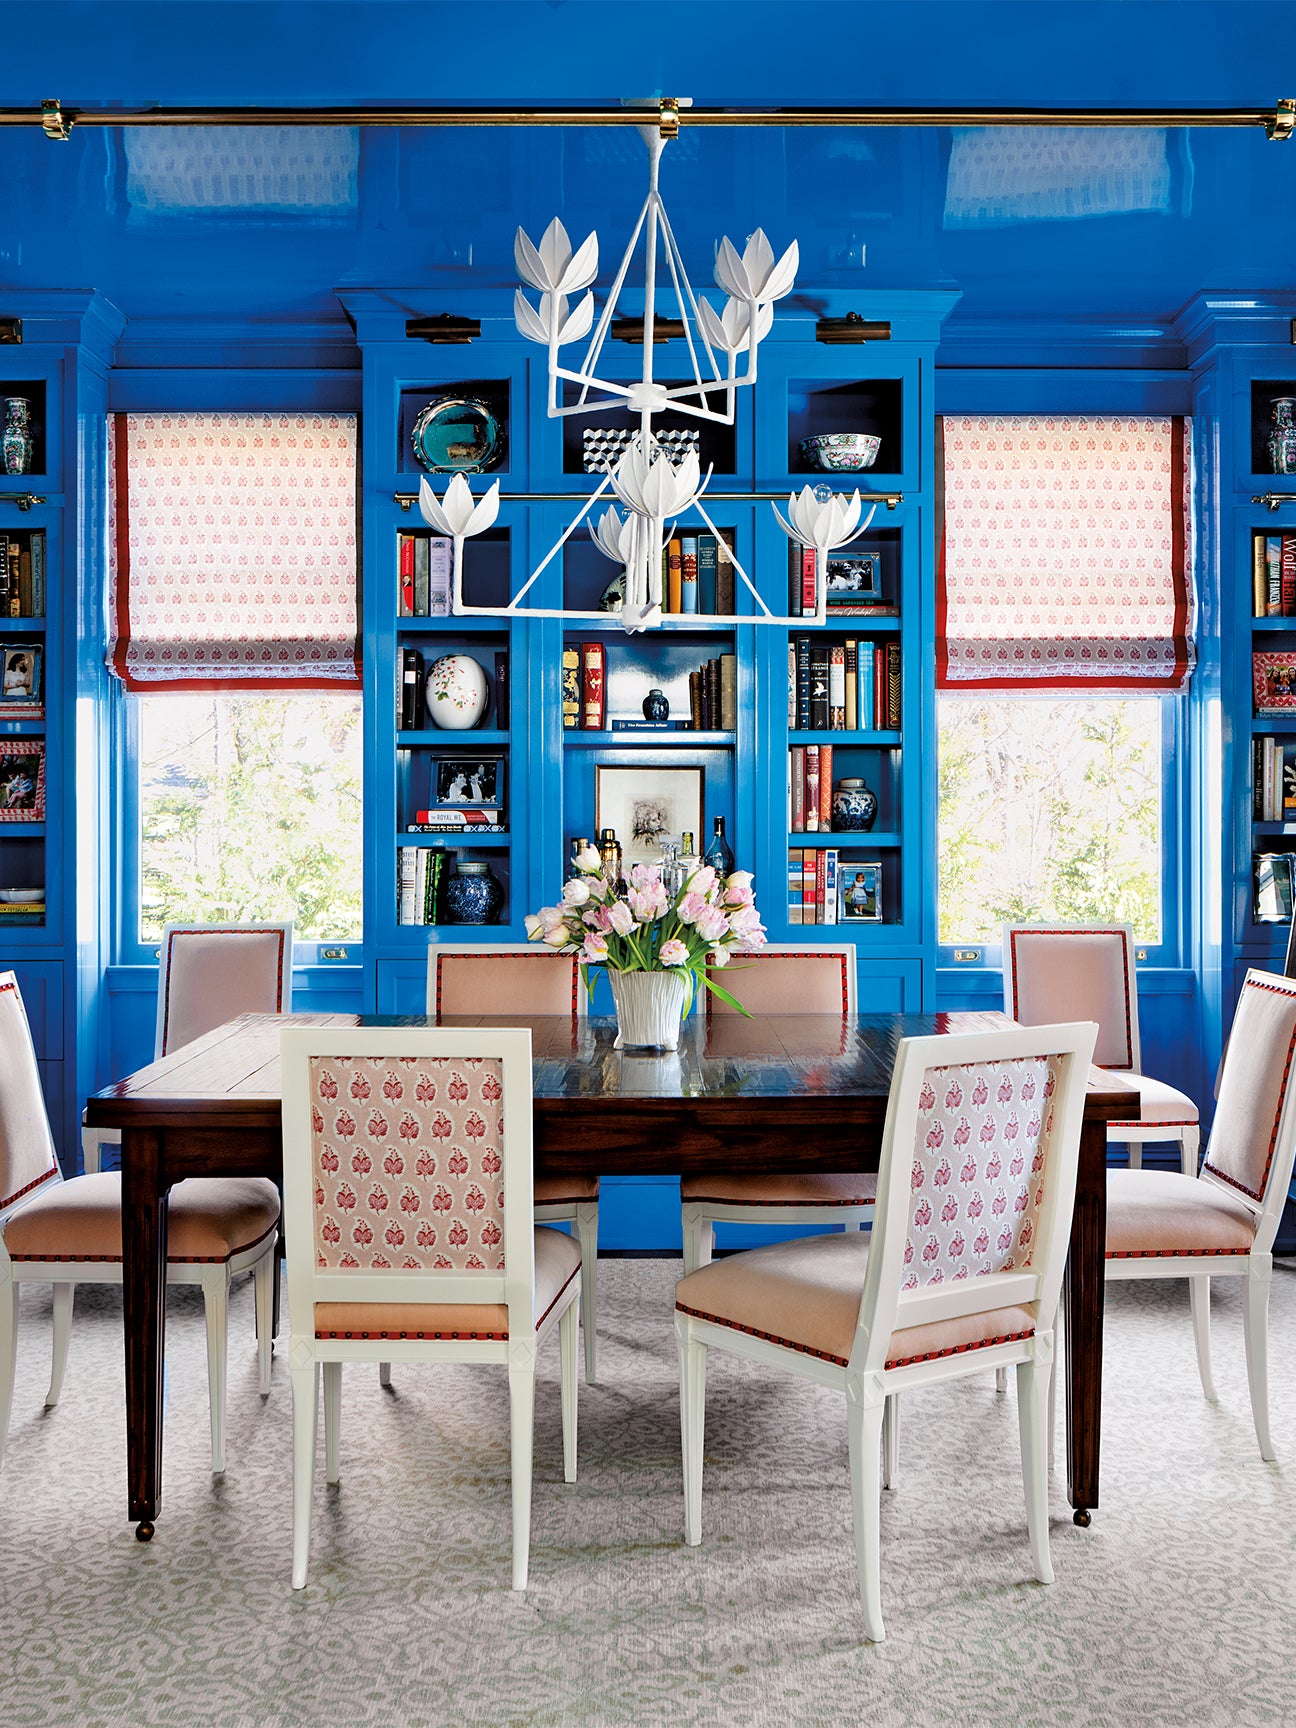 Cobalt blue dining room with red accents